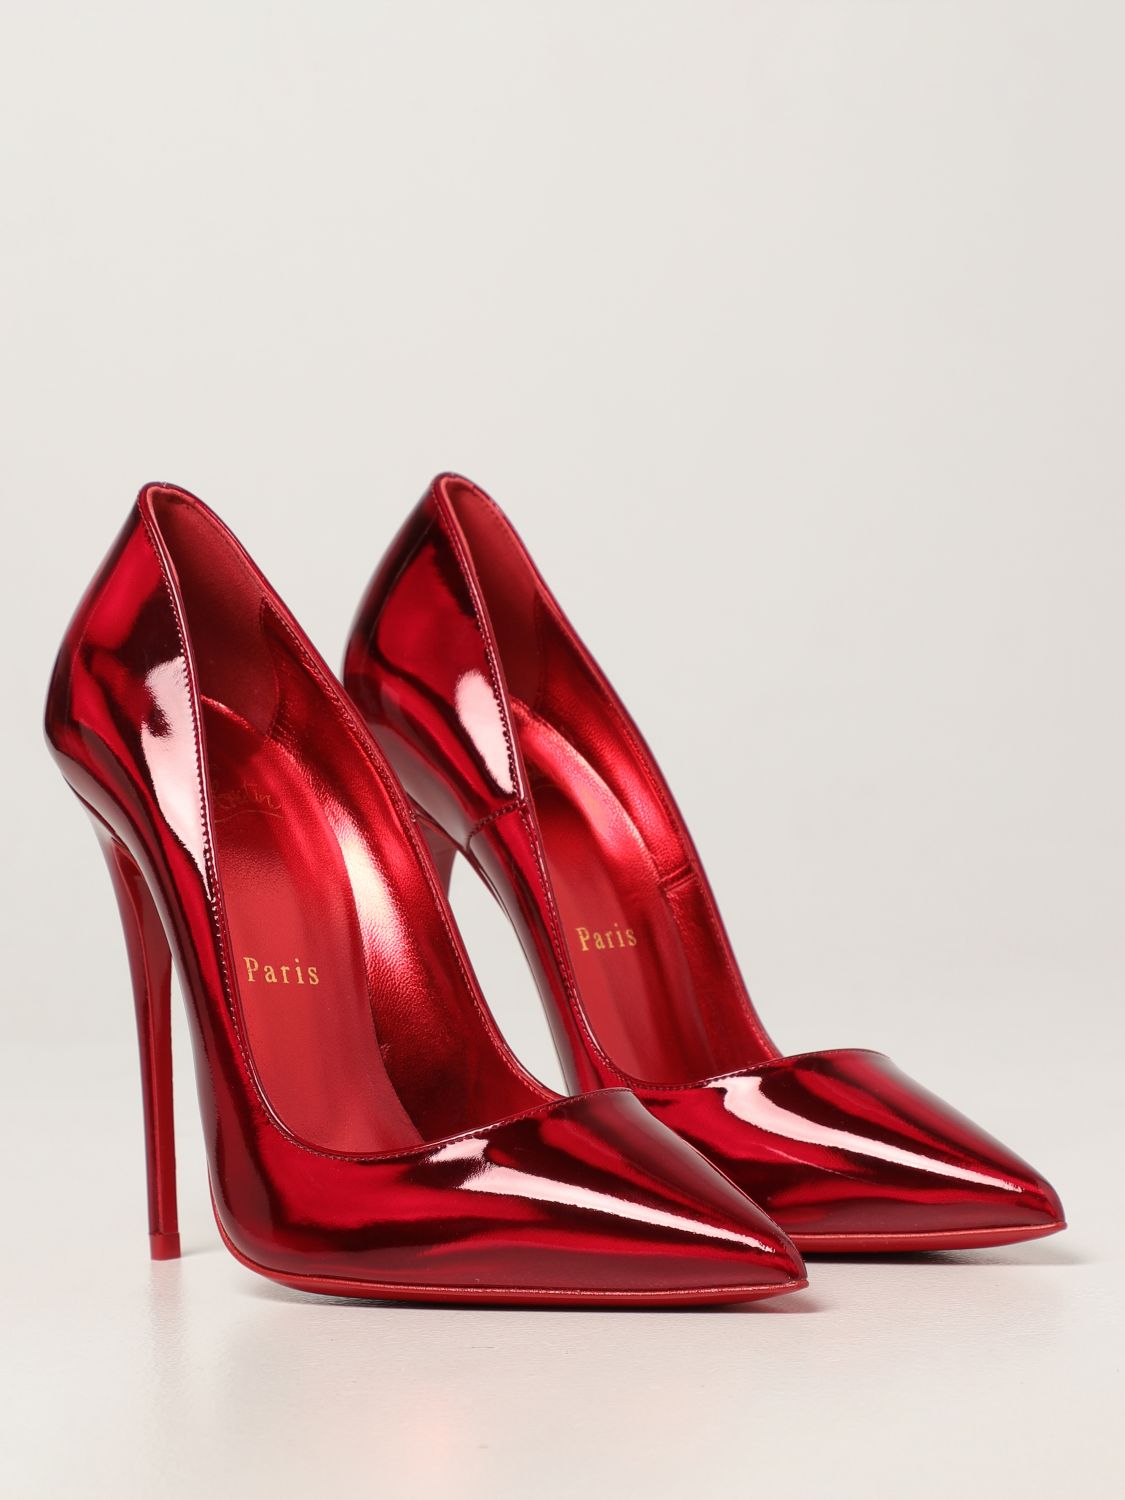 Kate Christian Louboutin décolleté in psychic patent leather